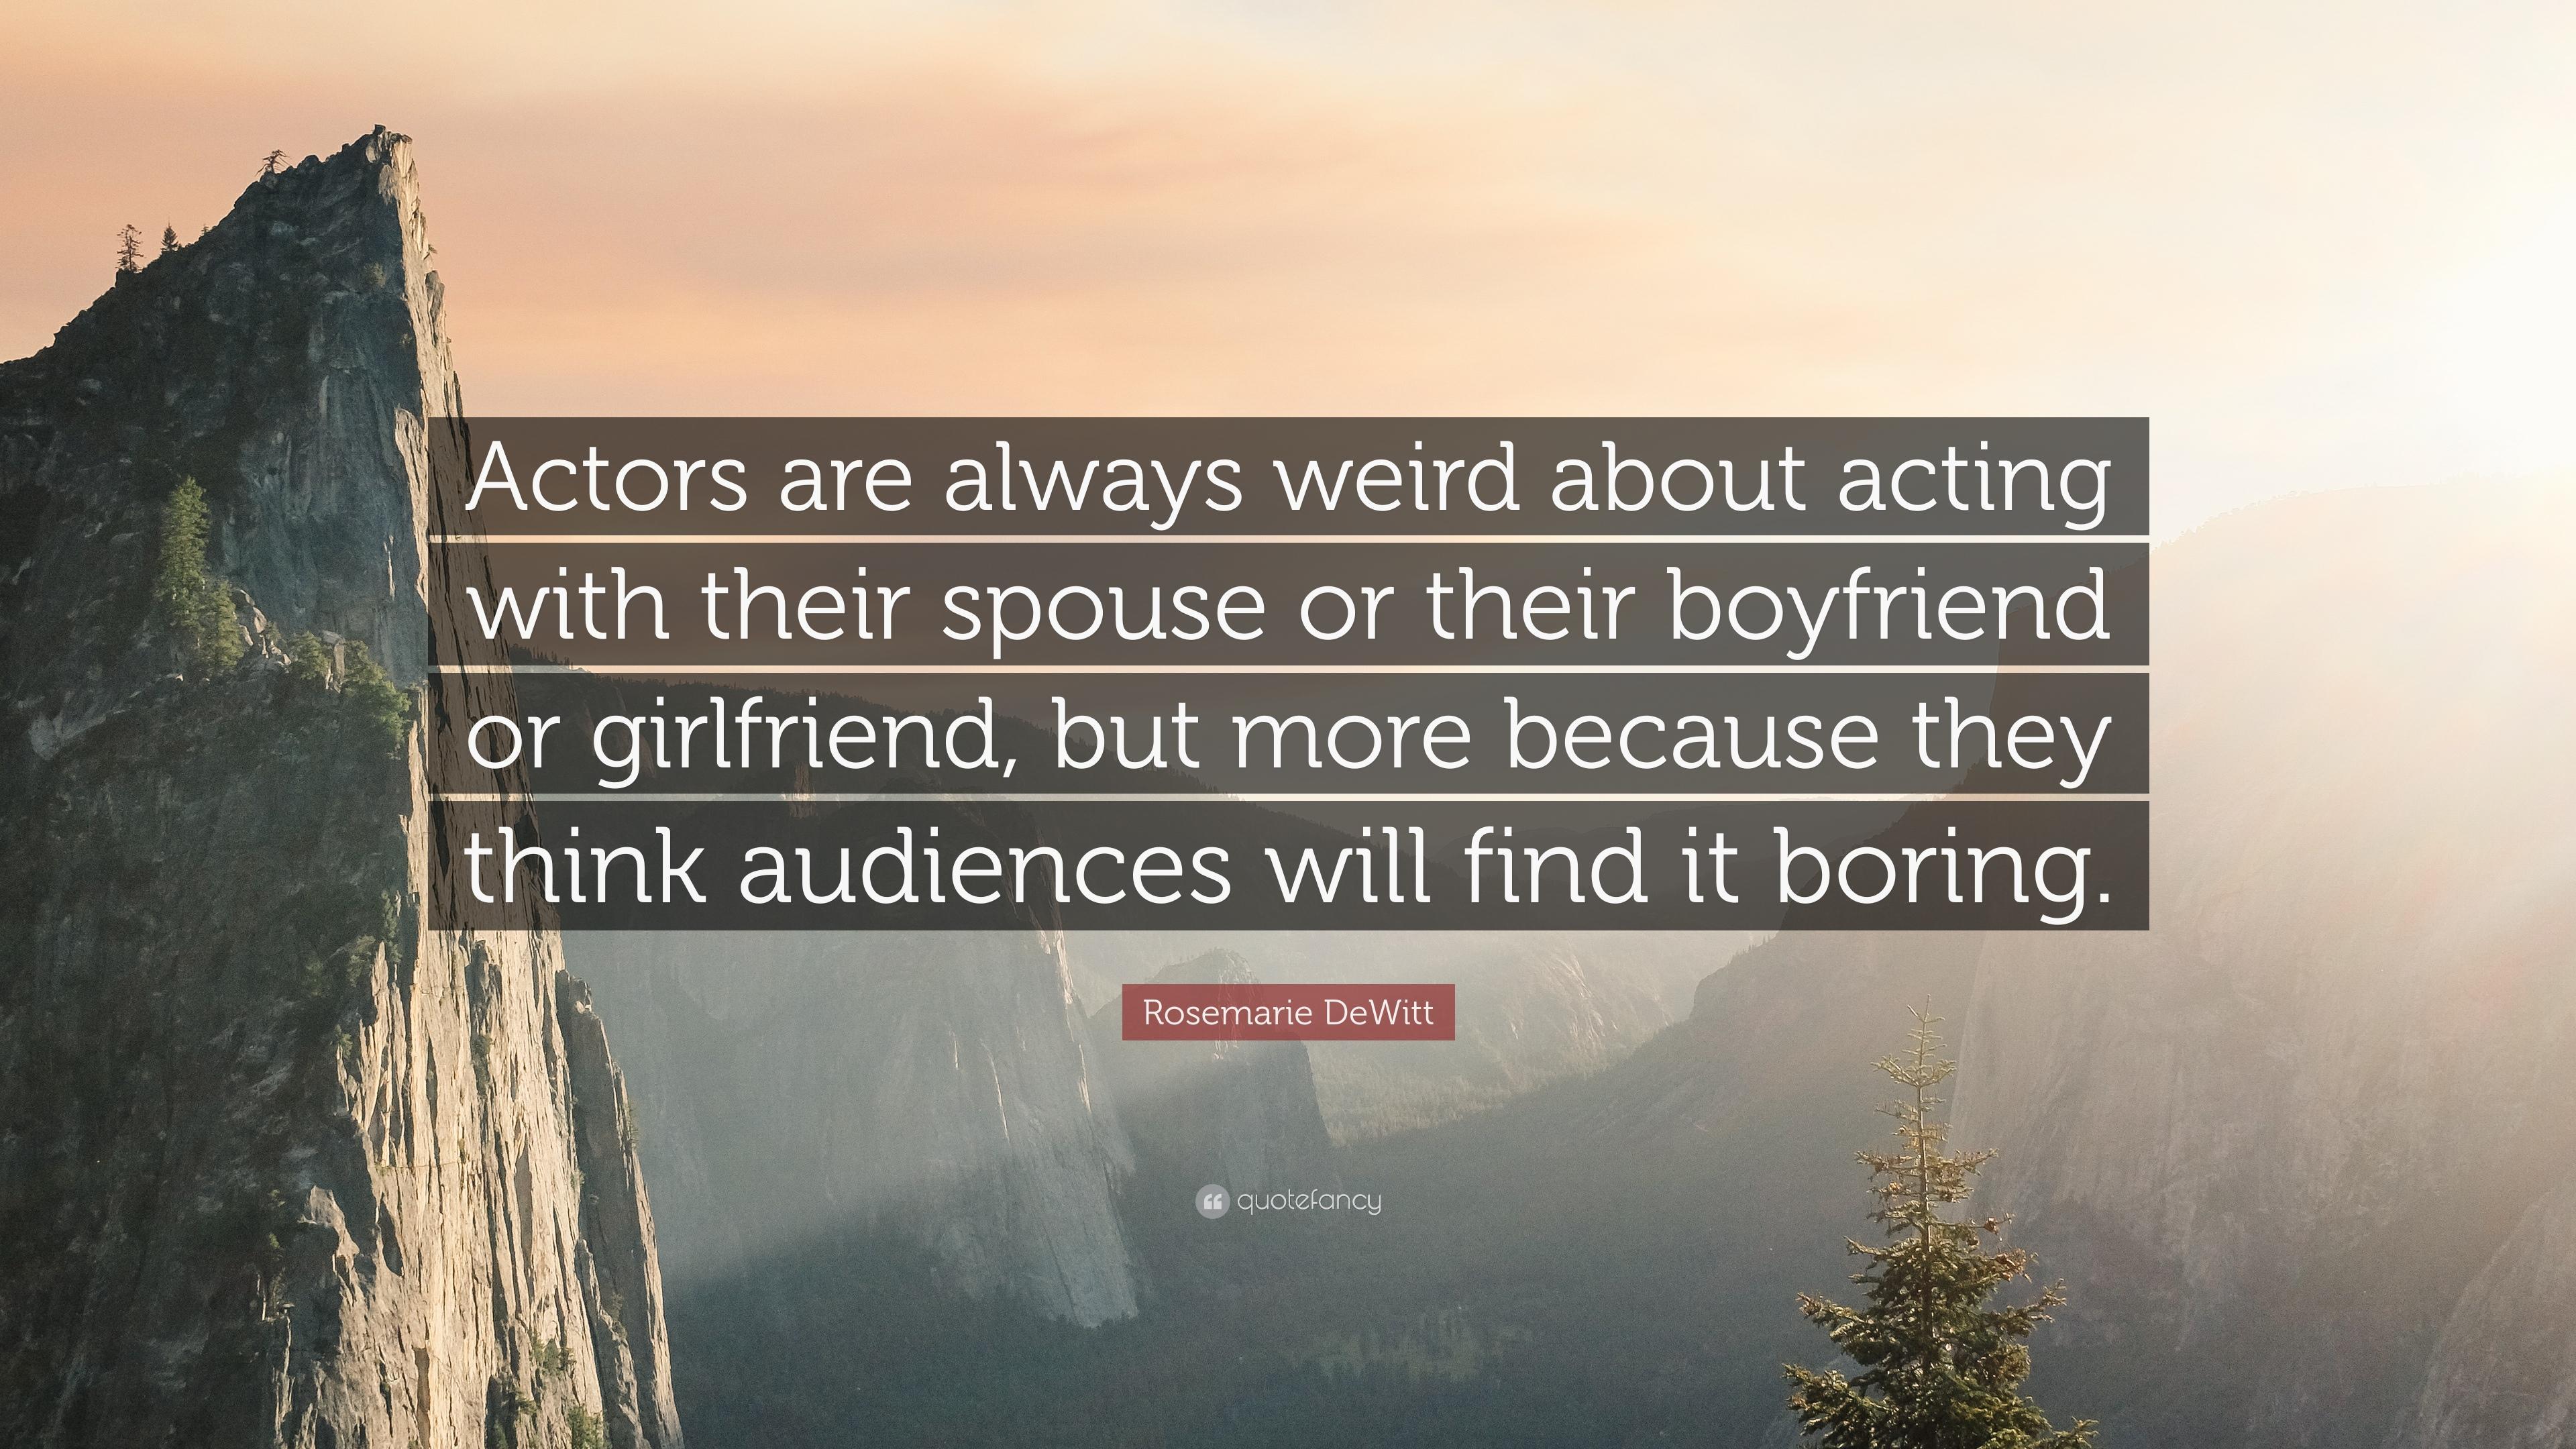 Rosemarie DeWitt Quote: “Actors are always weird about acting